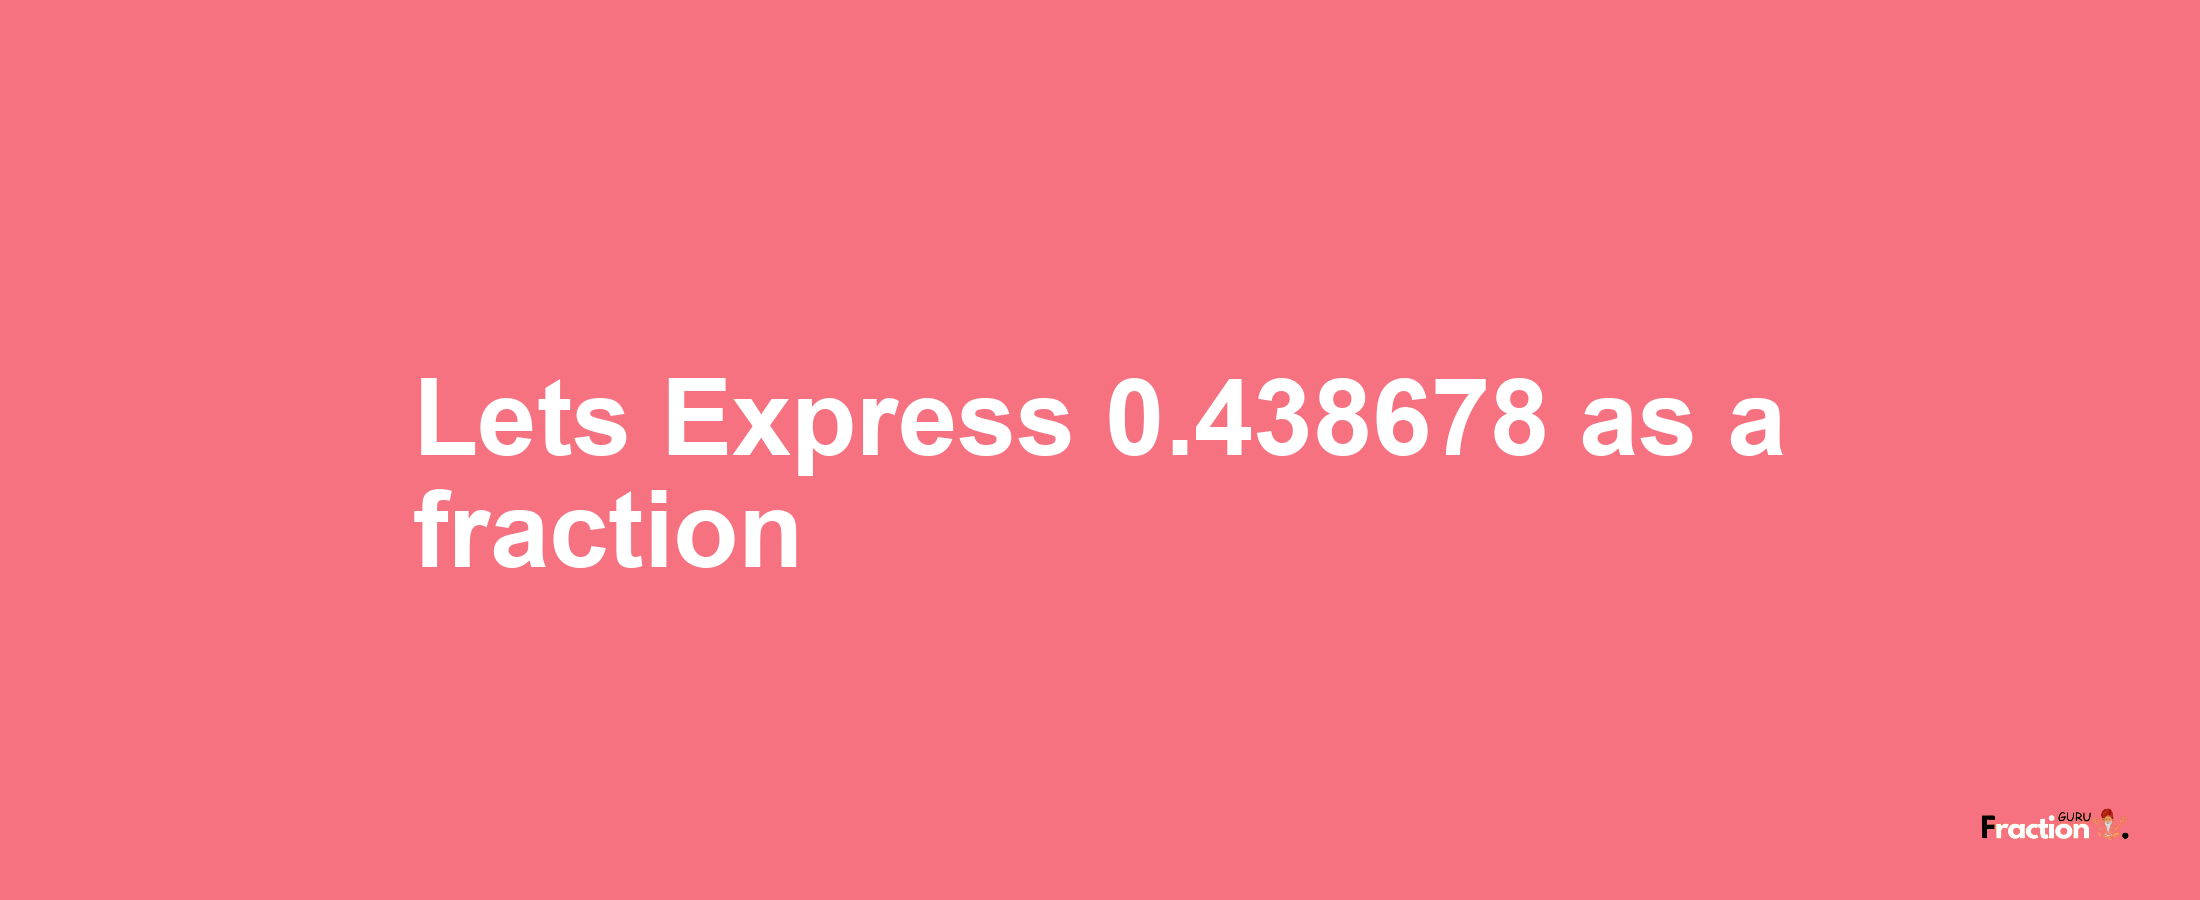 Lets Express 0.438678 as afraction